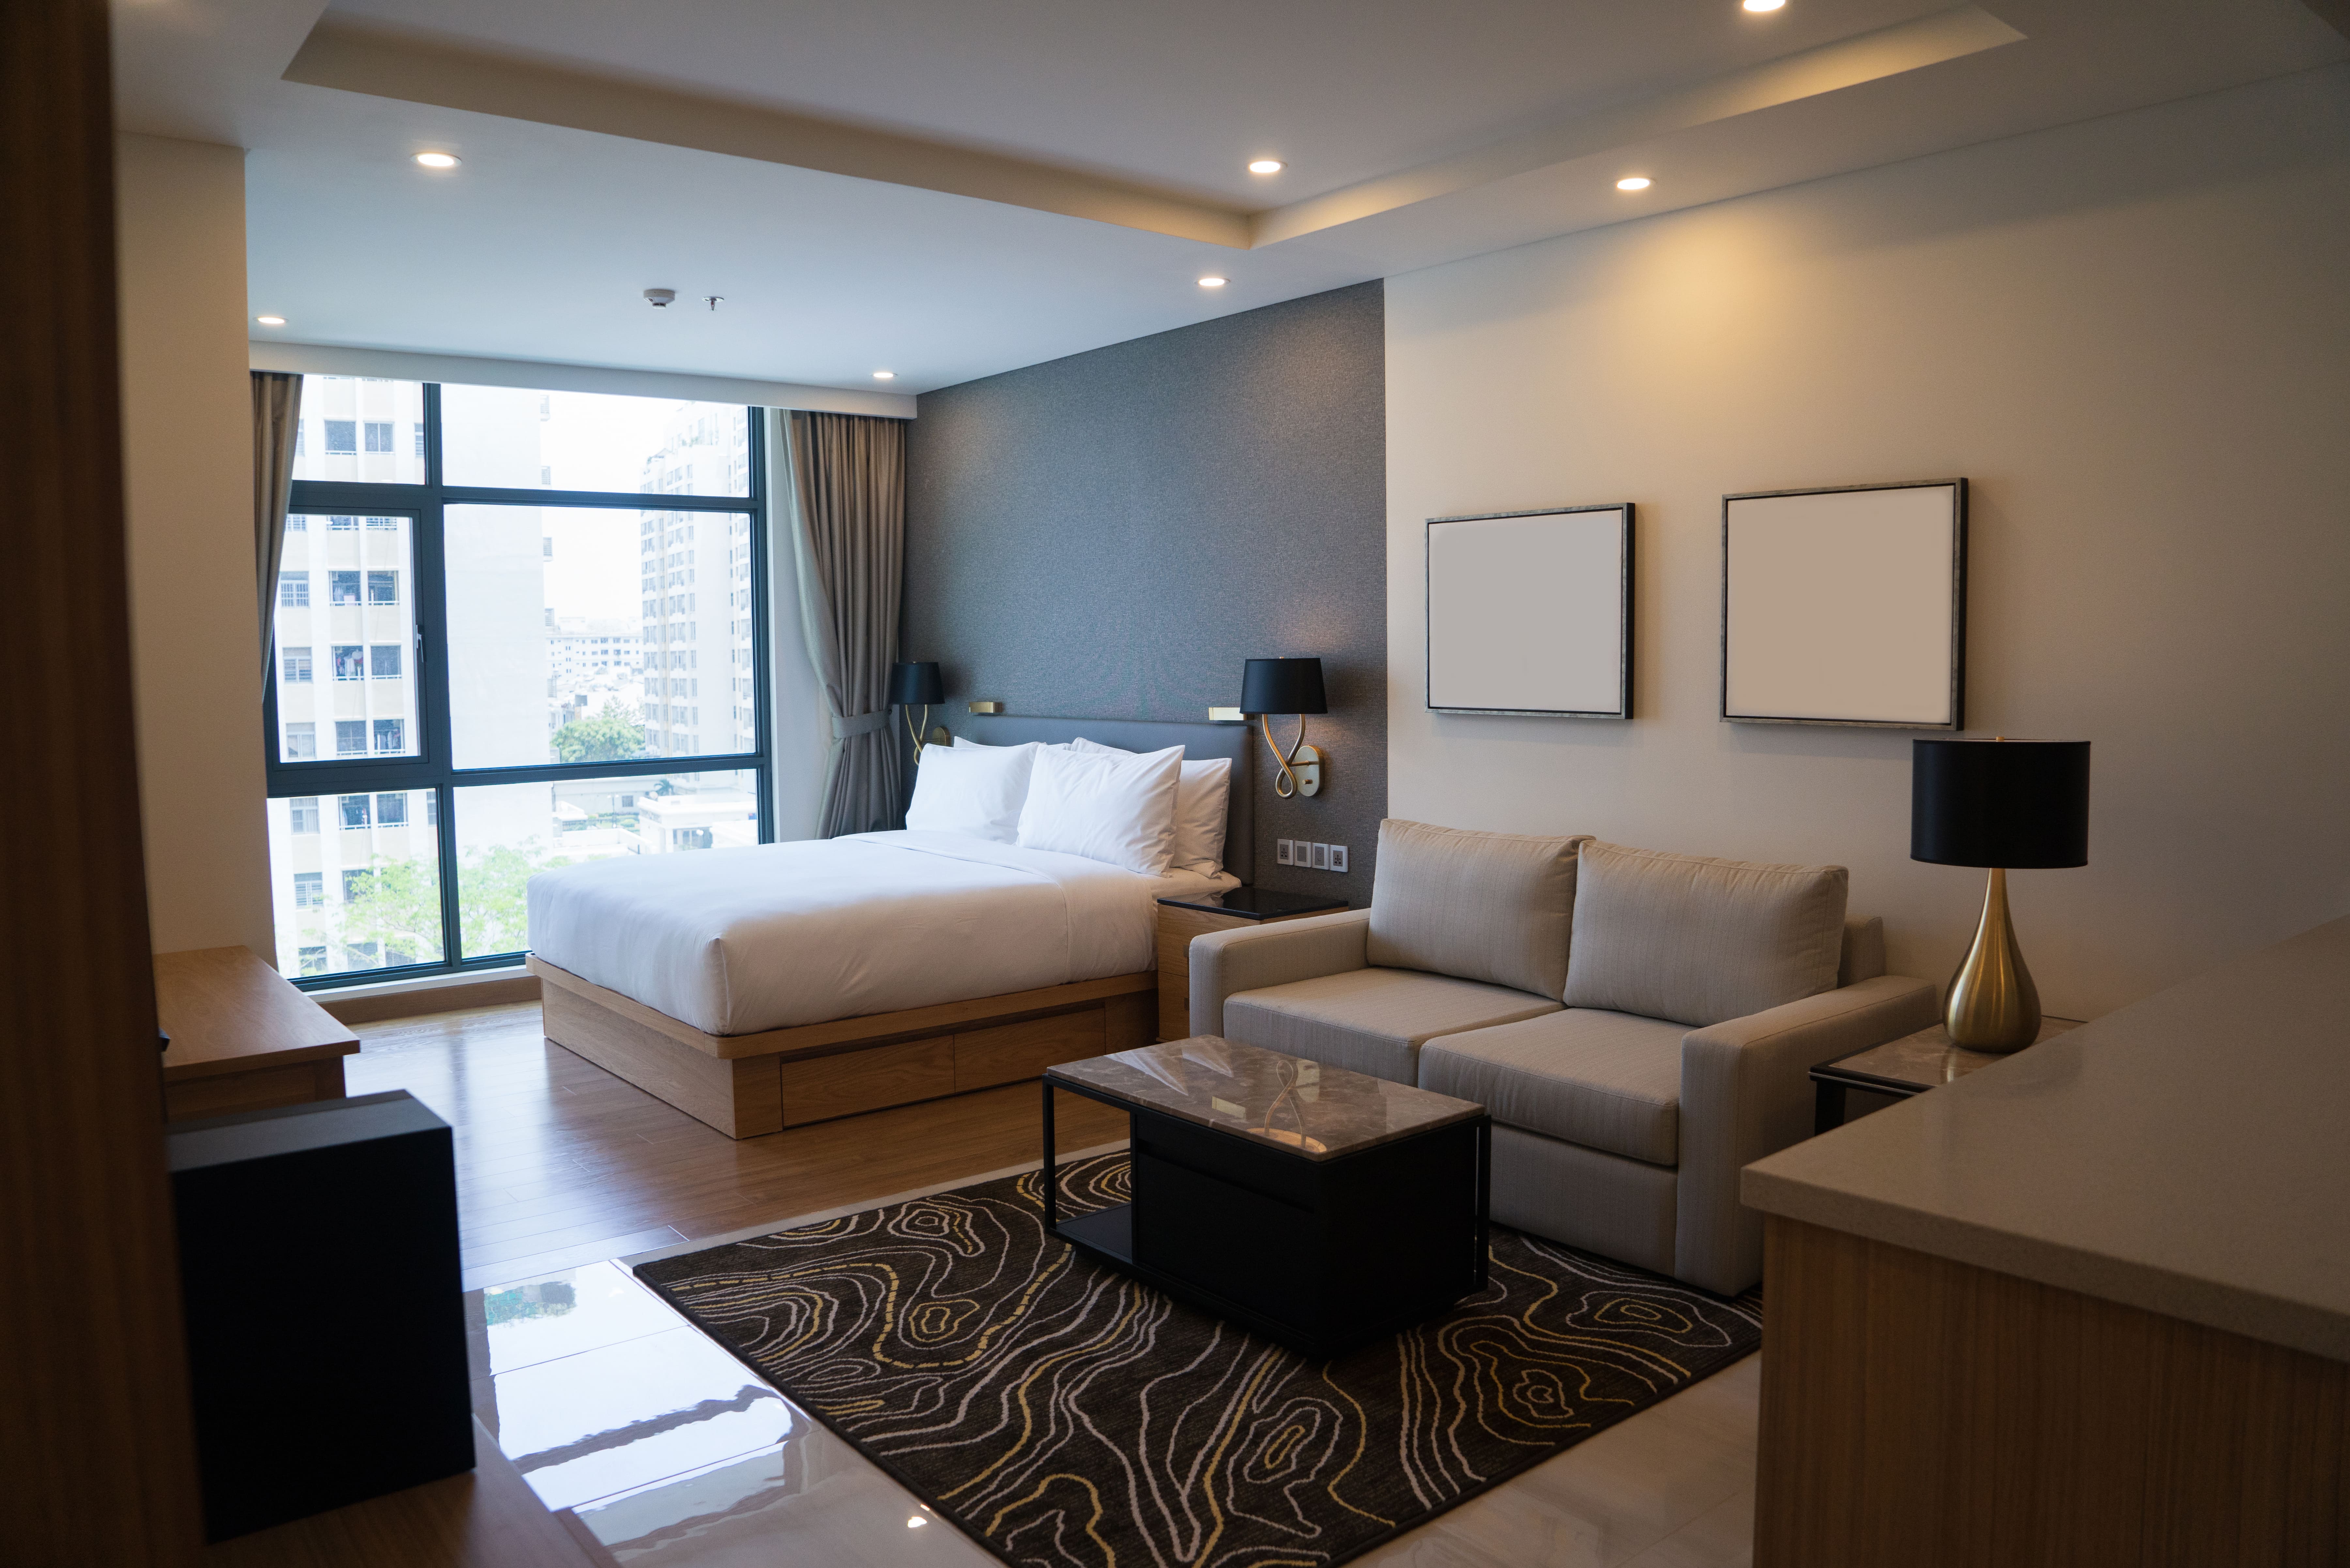 How to calculate your hotel renovation budget